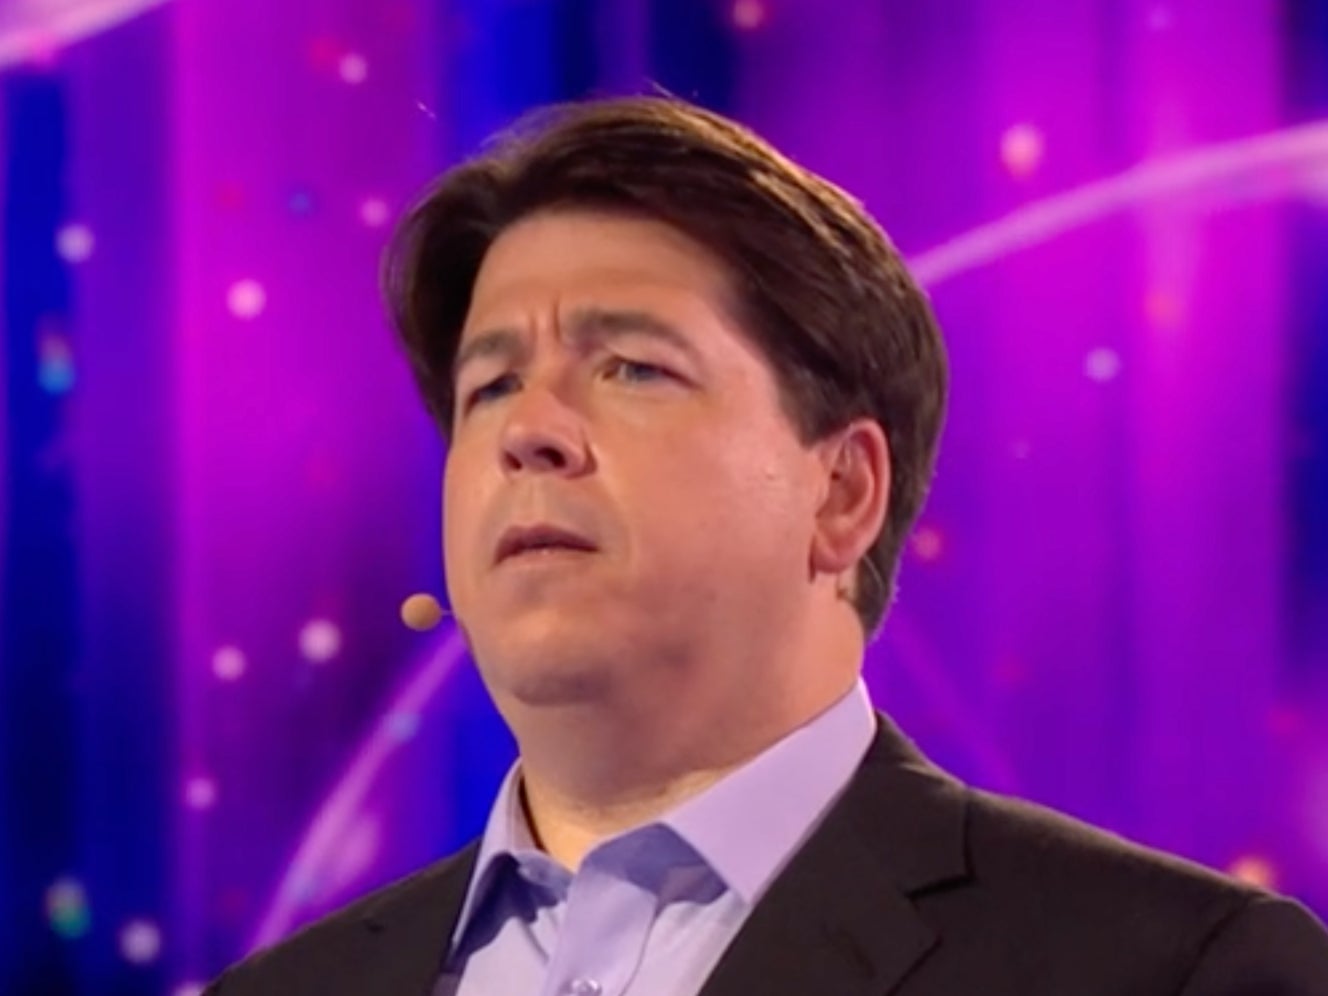 Michael McIntyre received emergency surgery to remove kidney stones